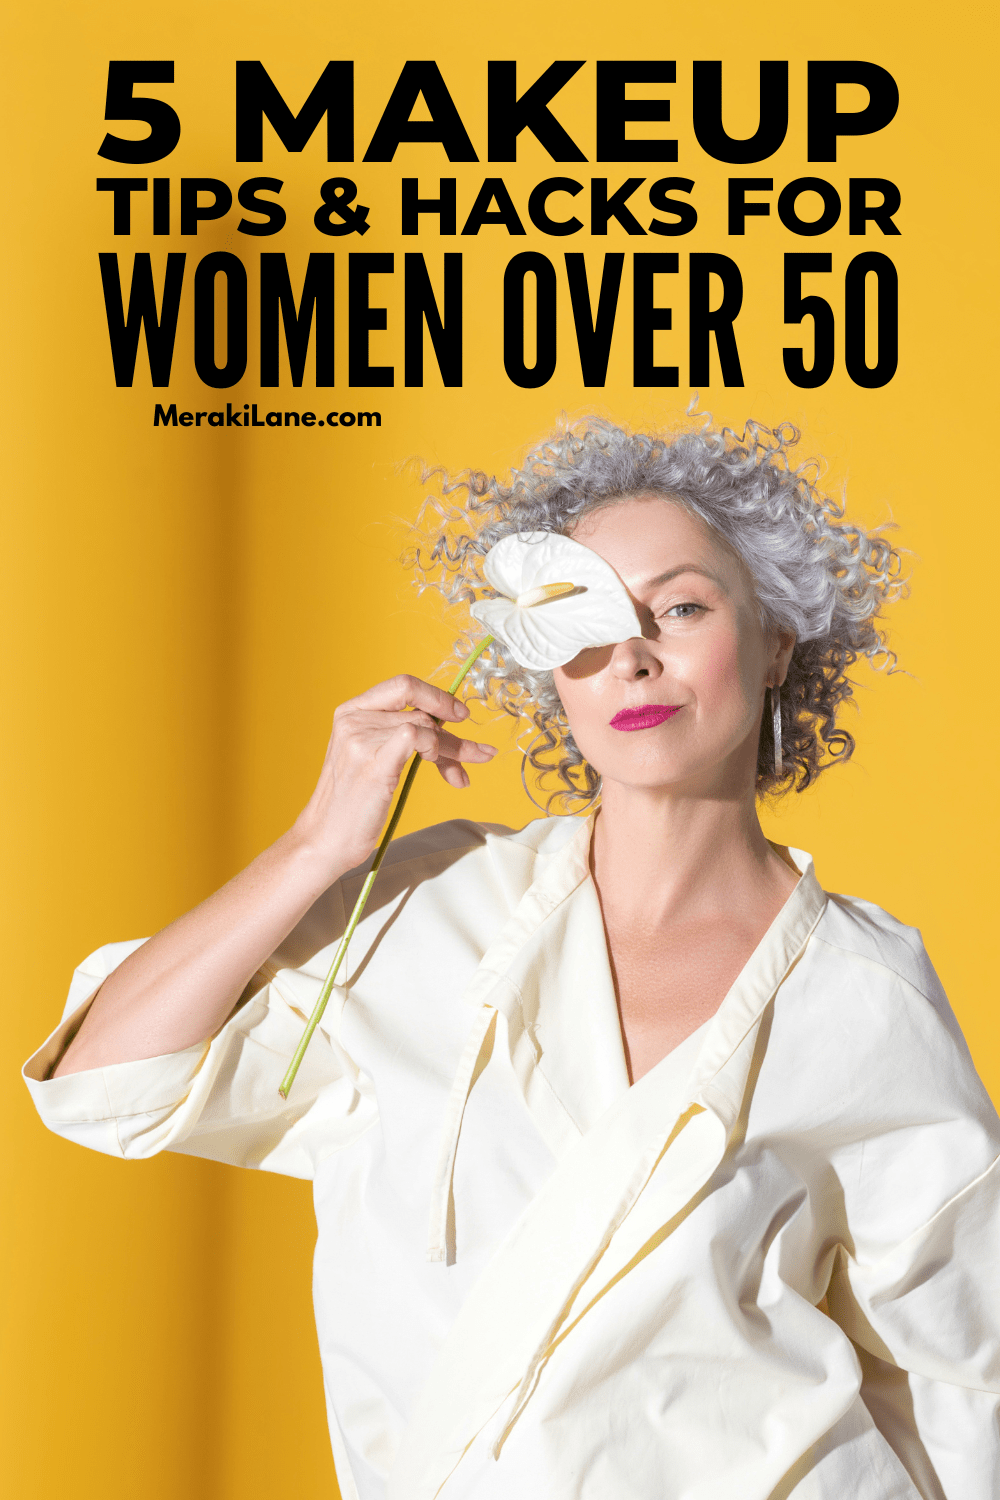 Makeup Tips For Women Over 50